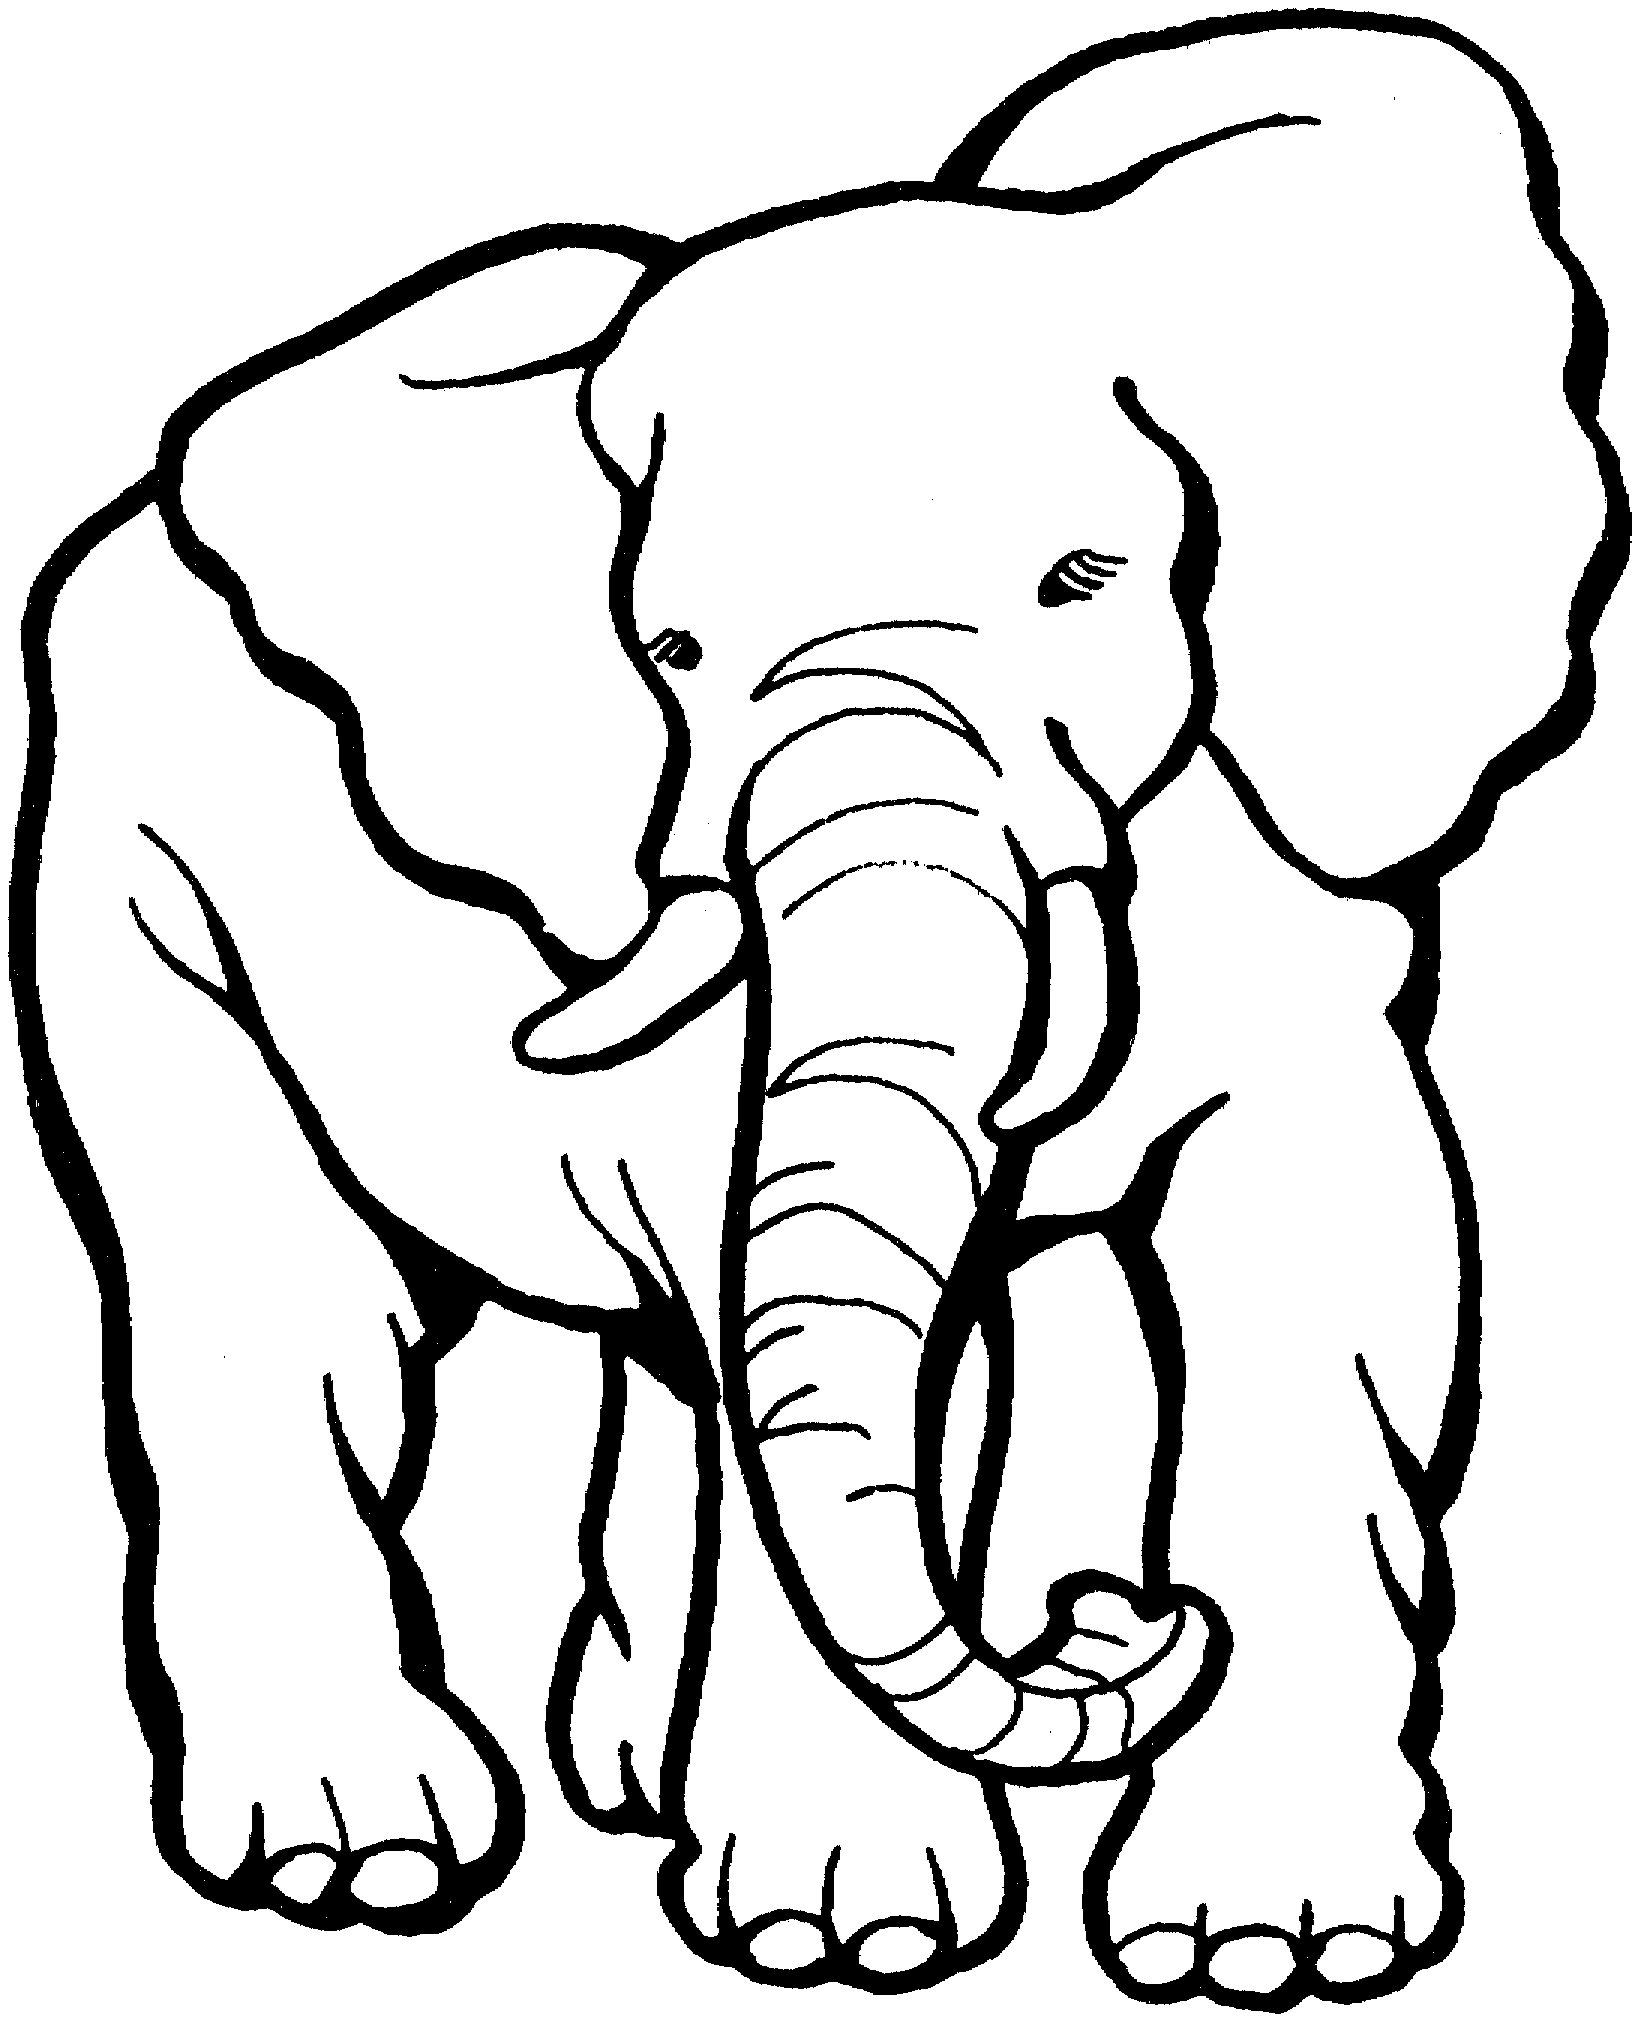 animal coloring pages elephant baby elephant coloring pages to download and print for free animal elephant pages coloring 